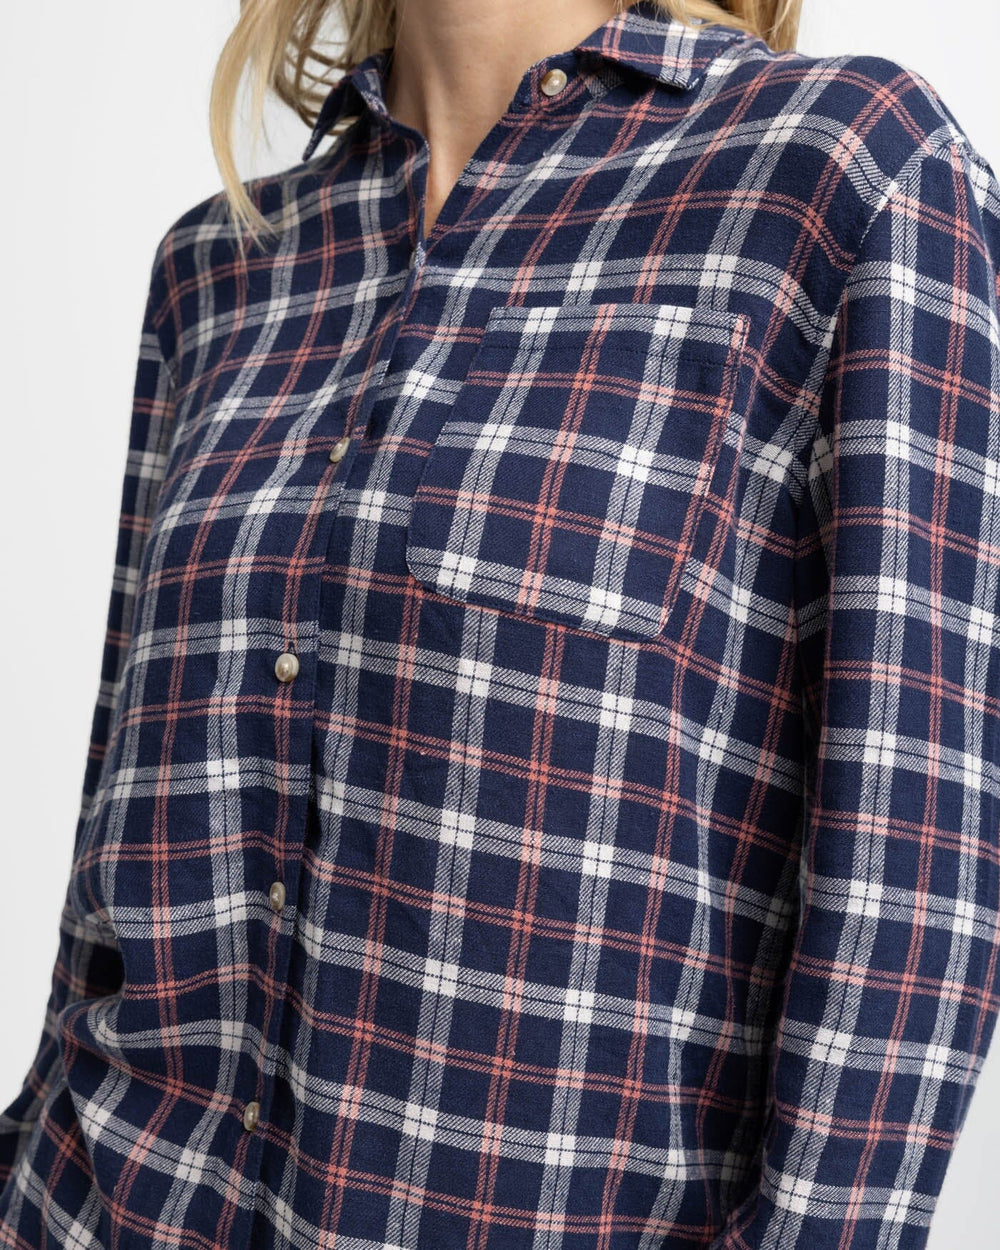 The detail view of the Southern Tide Niki Chilly Morning Plaid Shirt by Southern Tide - Nautical Navy